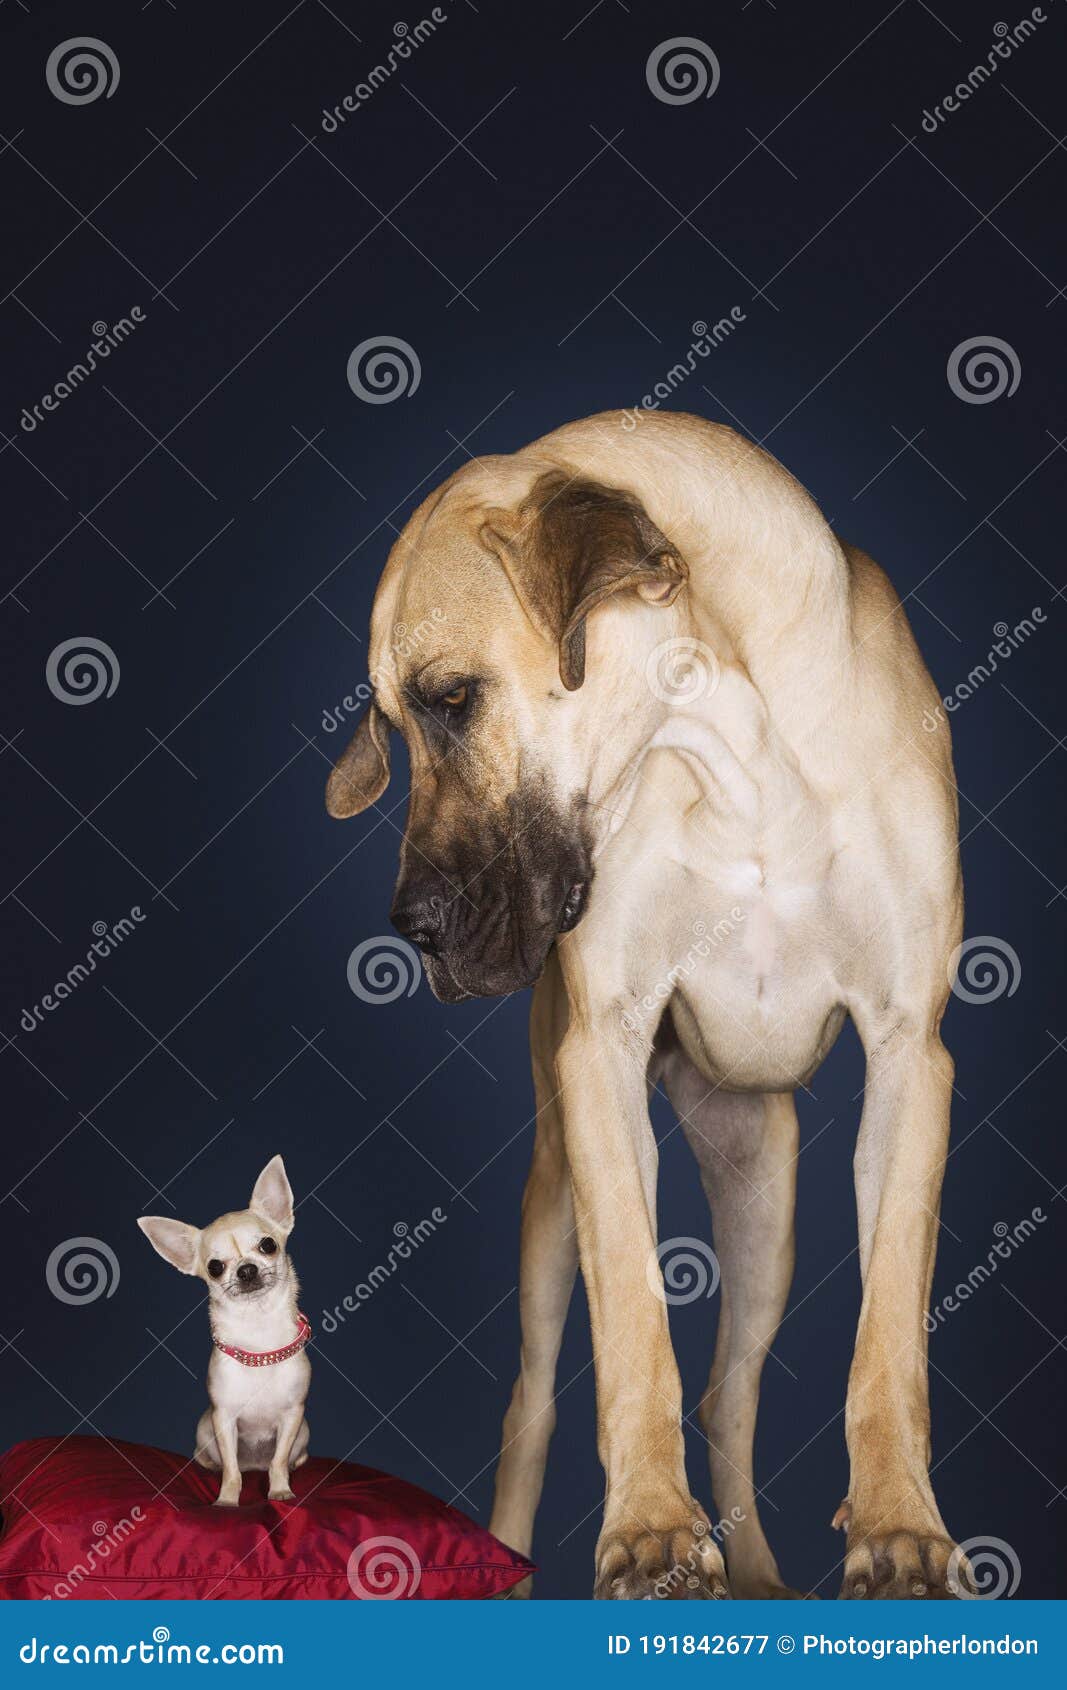 chihuahua sitting on red pillow great dane standing alongside front view